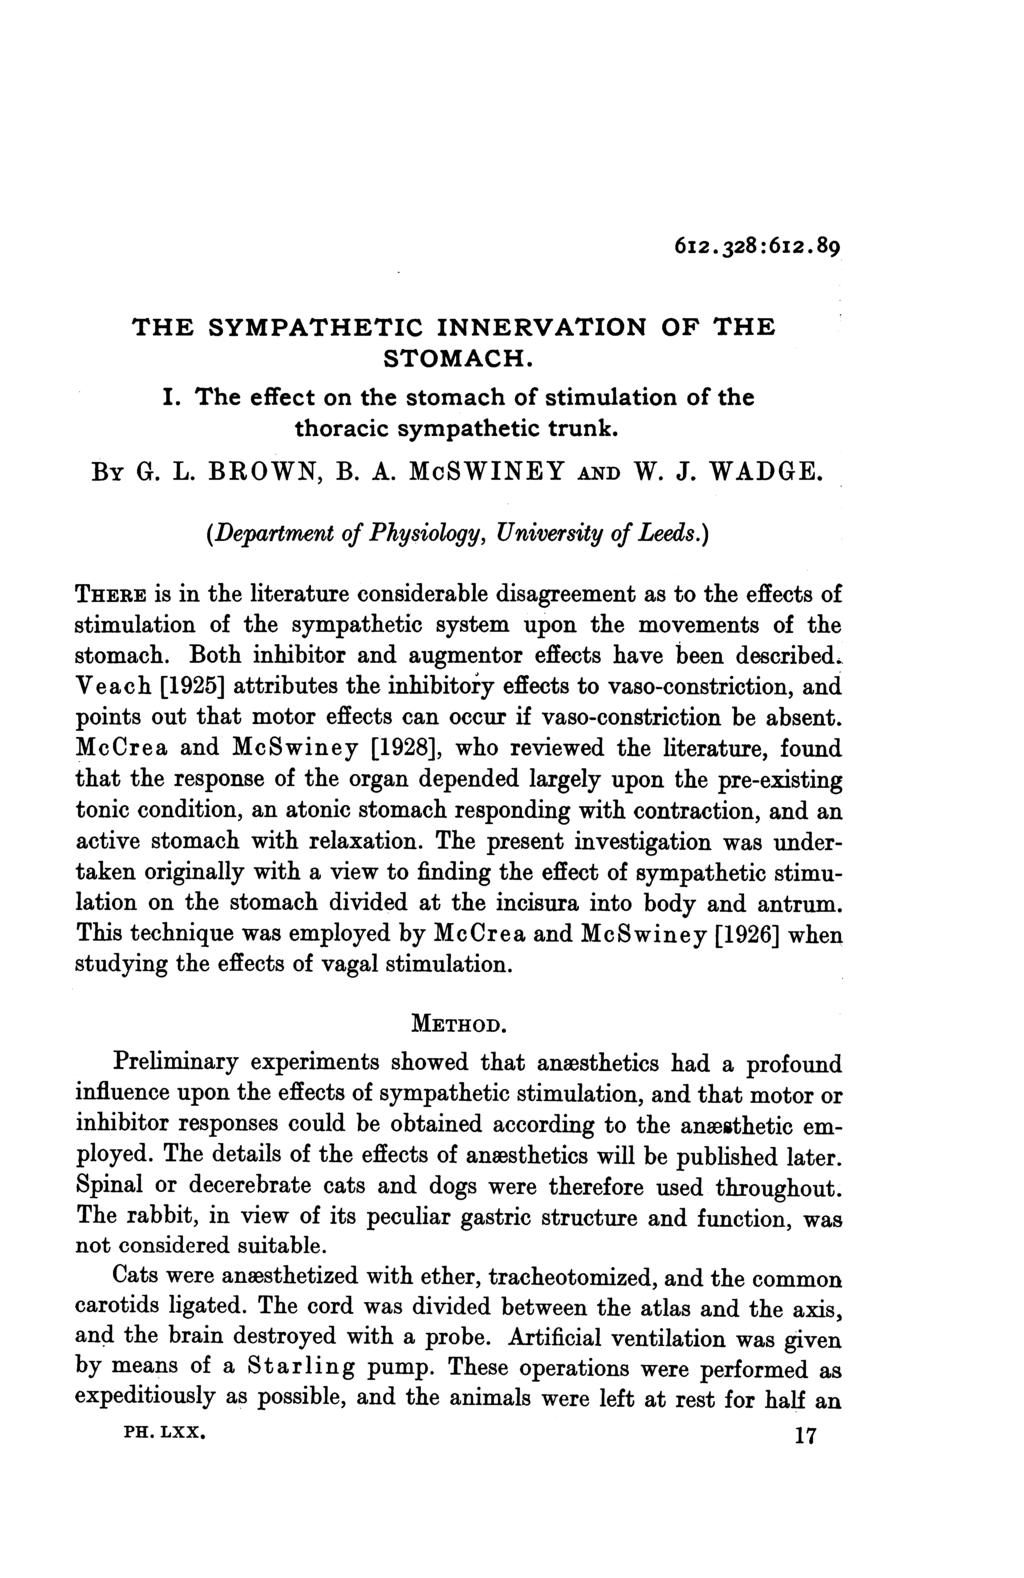 6I2.328:6I2.89 THE SYMPATHETIC INNERVATION OF THE STOMACH. I. The effect on the stomach of stimulation of the thoracic sympathetic trunk. BY G. L. BROWN, B. A. McSWINEY AND W. J. WADGE.